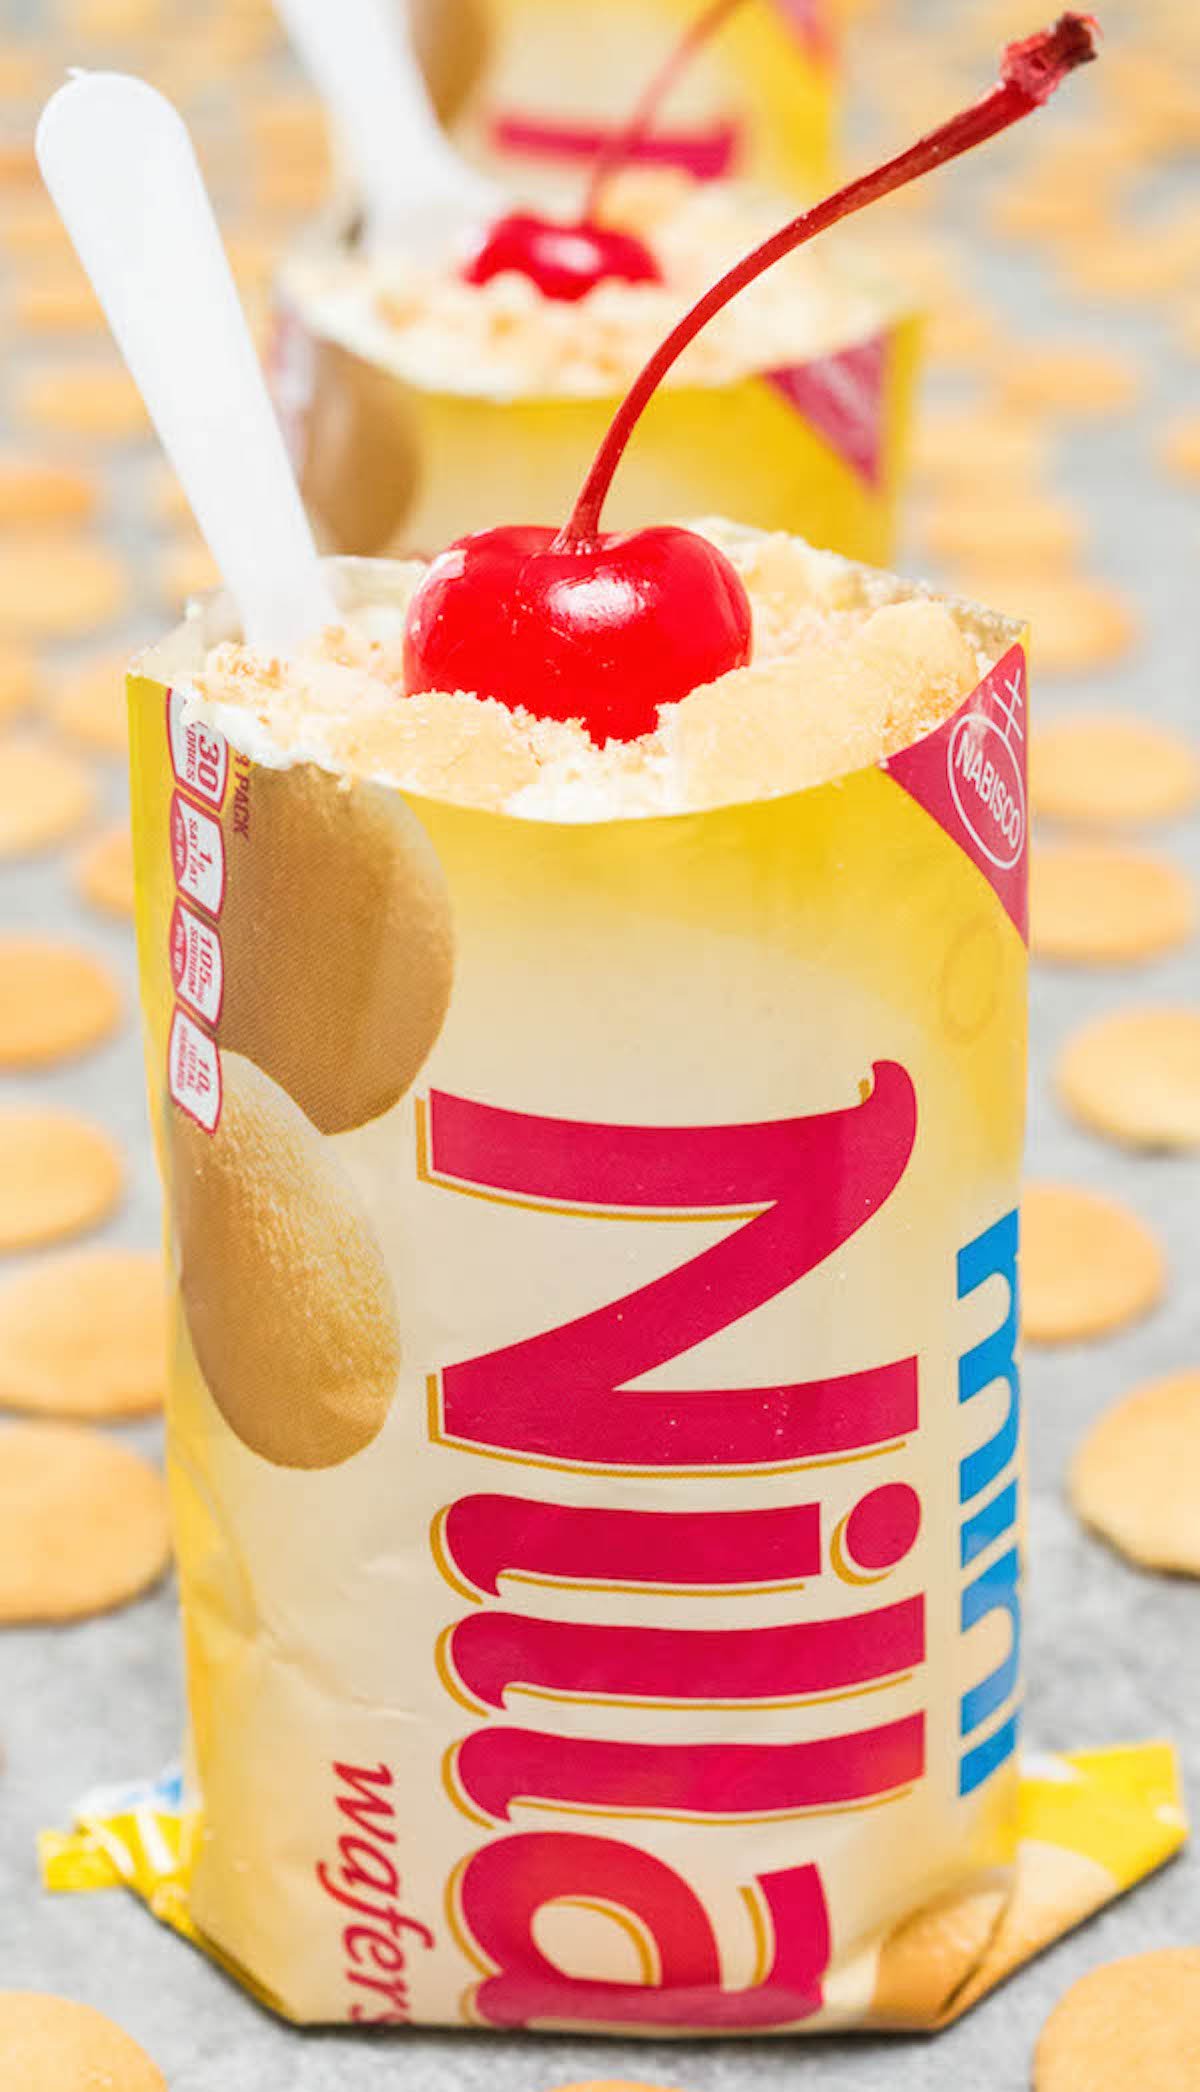 A small bag of mini nilla wafers is filled with banana pudding and topped with a maraschino cherry and small plastic spoon.